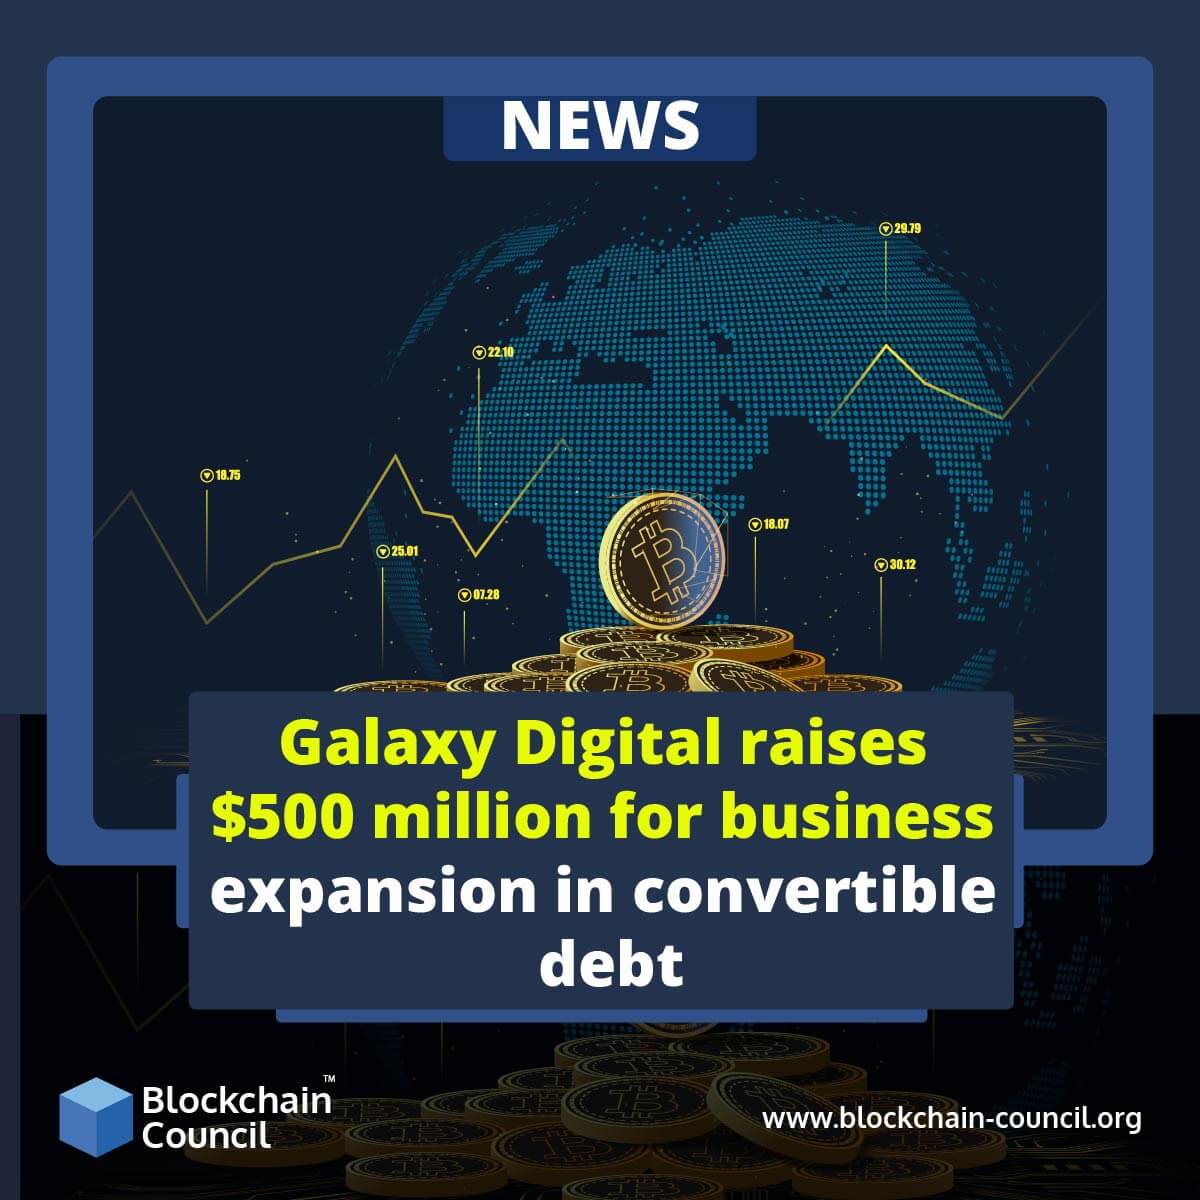 Galaxy Digital raises 500 million US dollars for the expansion of convertible bond business